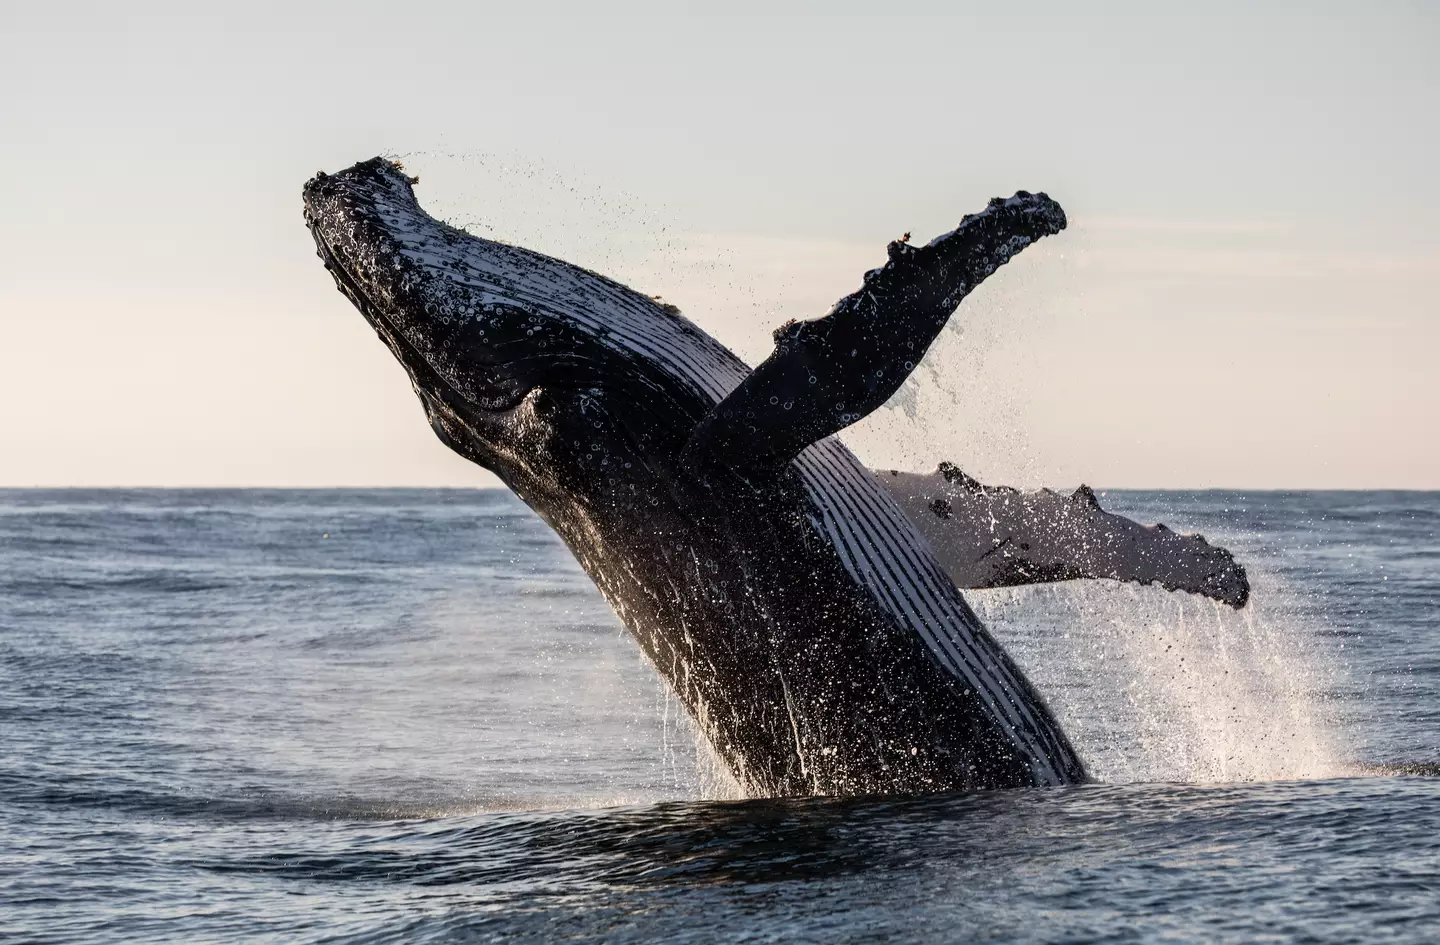 Despite there well meaning actions, marine authorities have said actions were against the law and risked injury from a distressed and unpredictable whale.(Getty Stock Image)